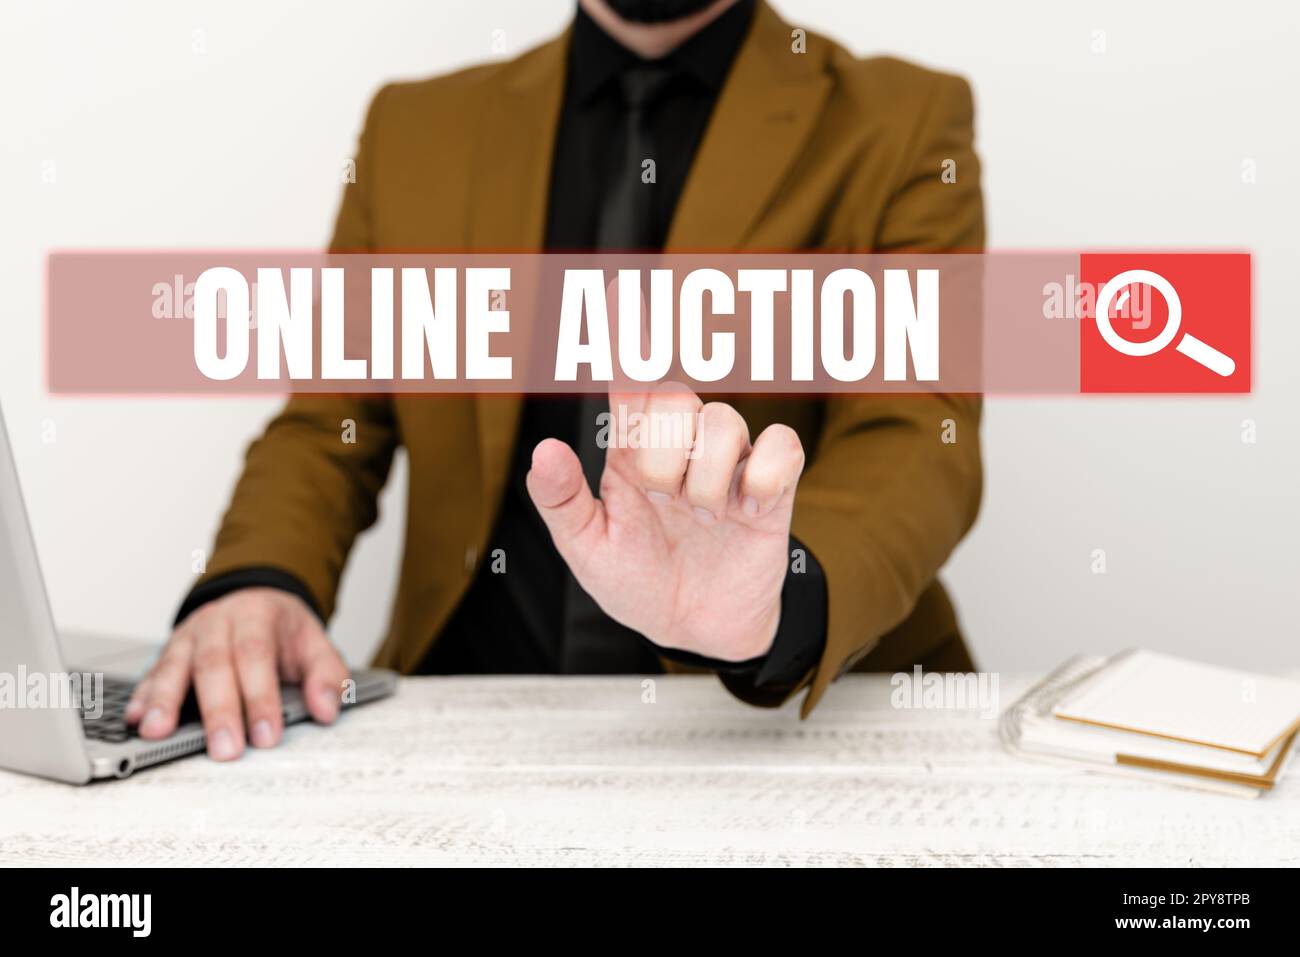 Sign displaying Online Auction. Business idea process of buying and selling goods or services online Stock Photo